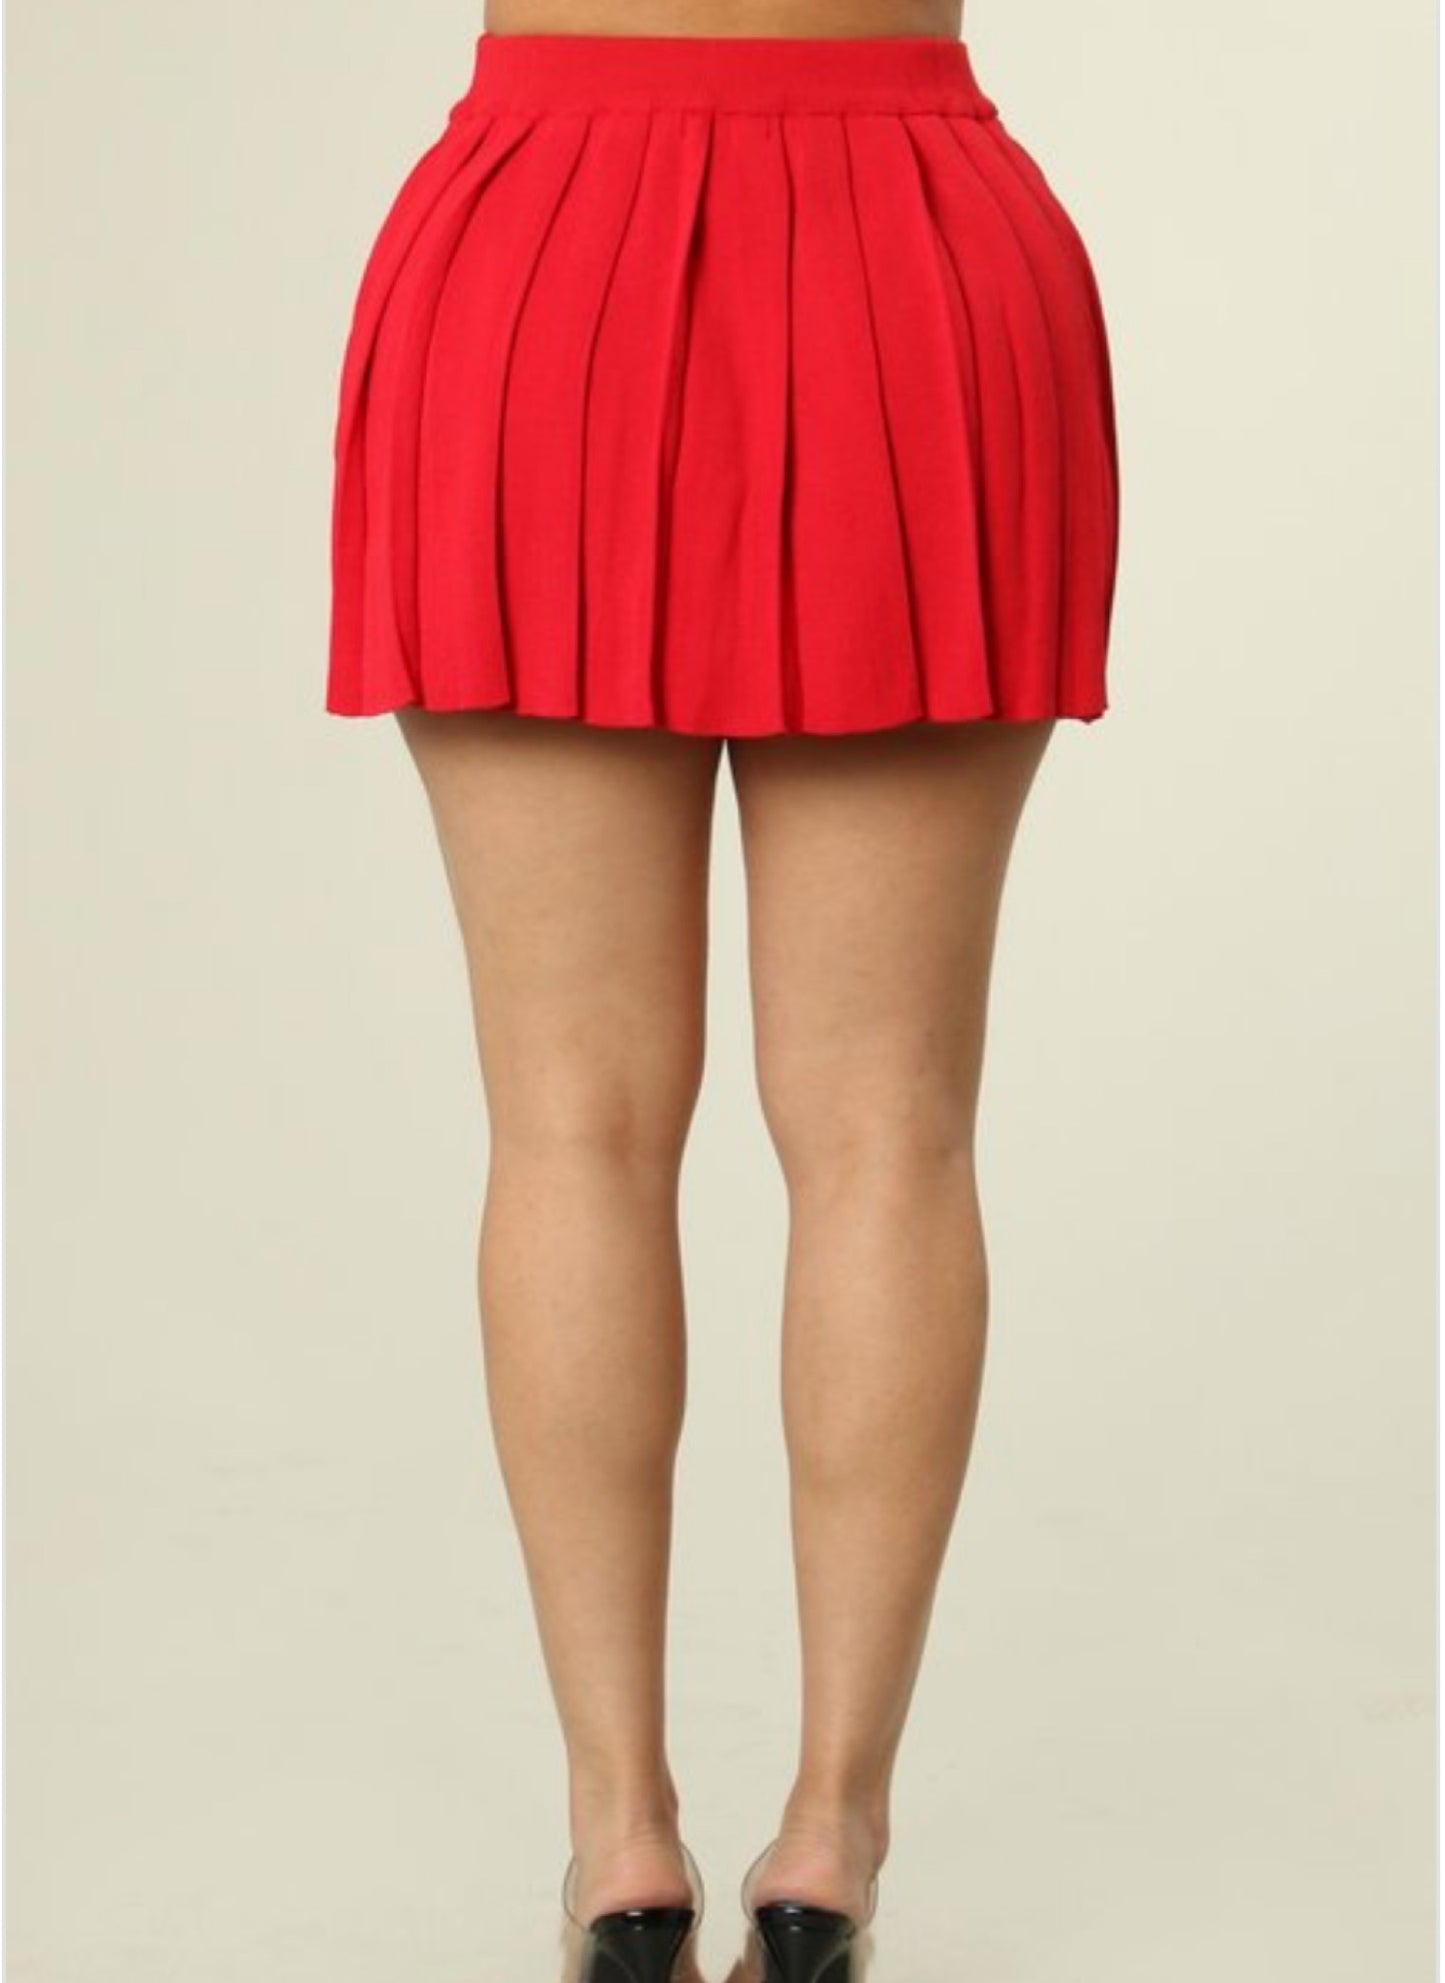 SOLID COLOR PATTERN PLEATED MINI SKIRT